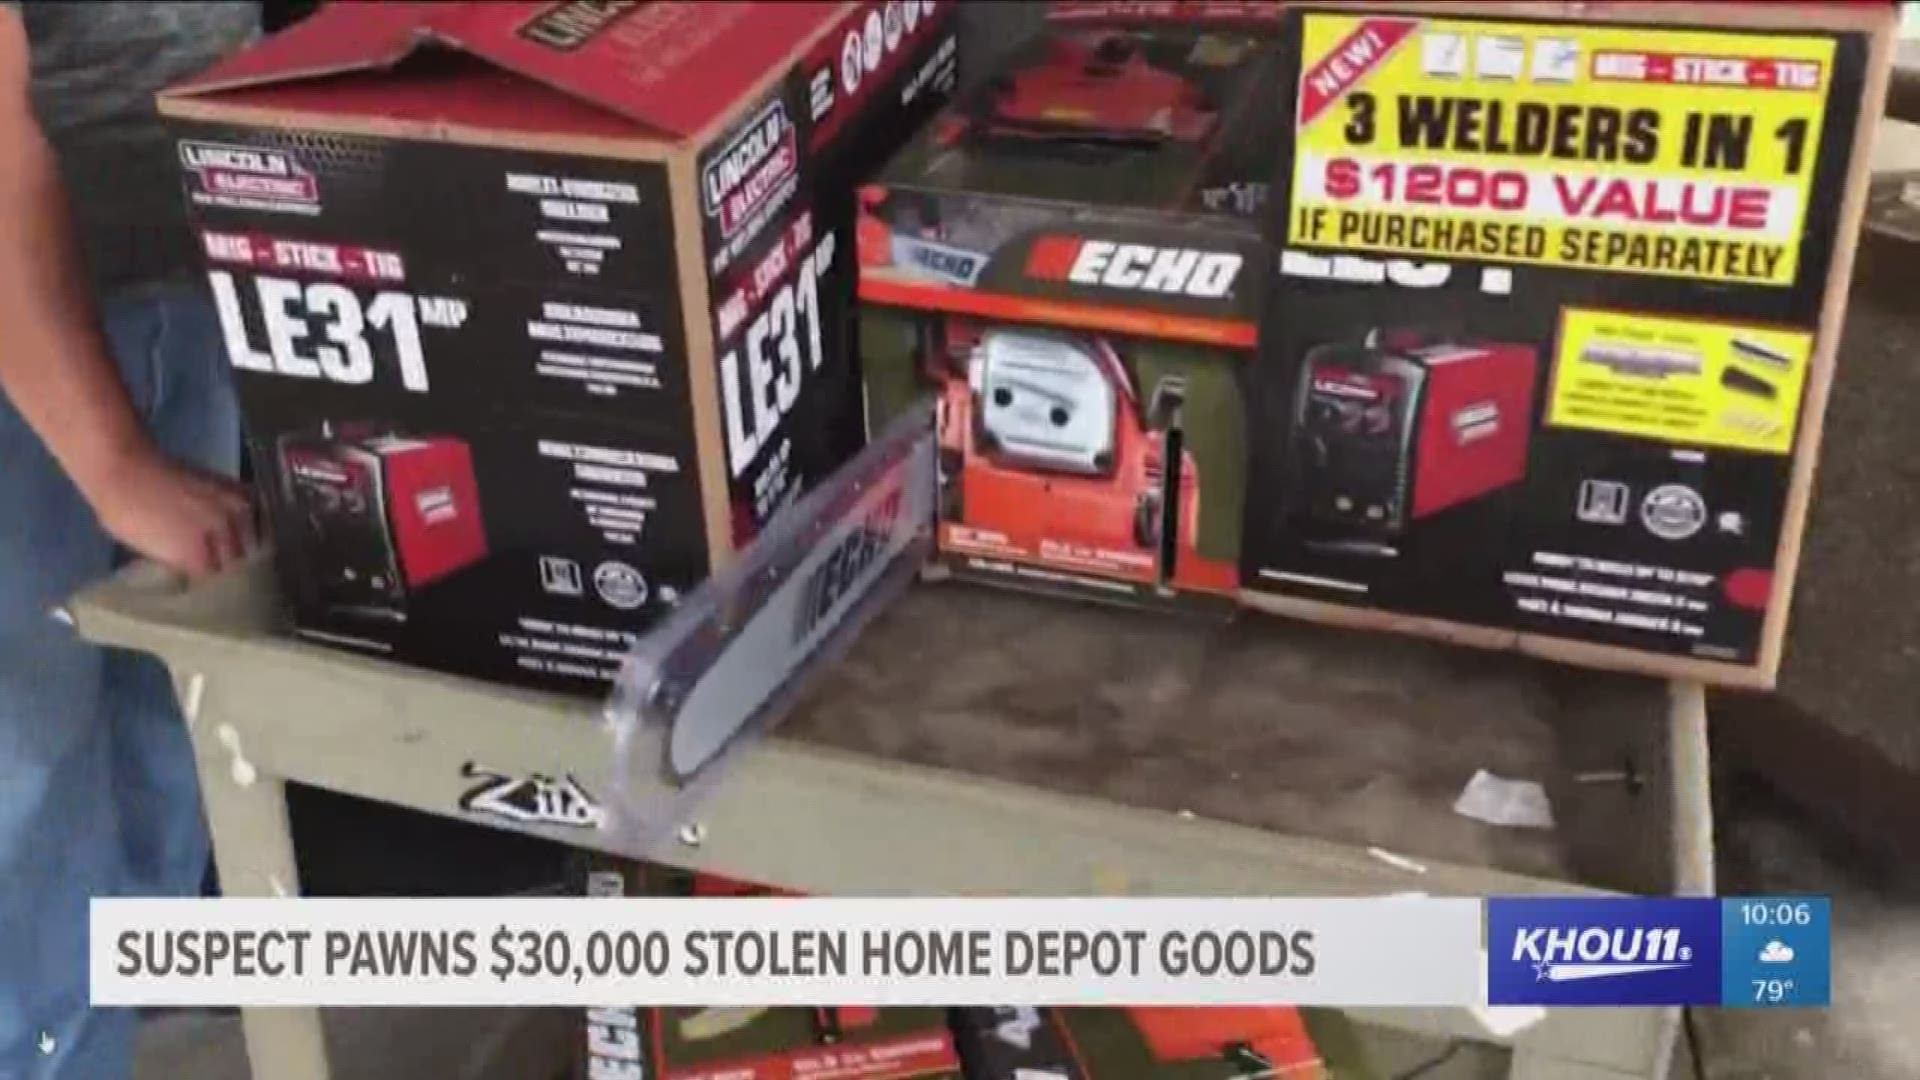 Deputies are looking for a man accused of stealing more than $30,000 worth of merchandise from numerous Houston-area Home Depot stores.